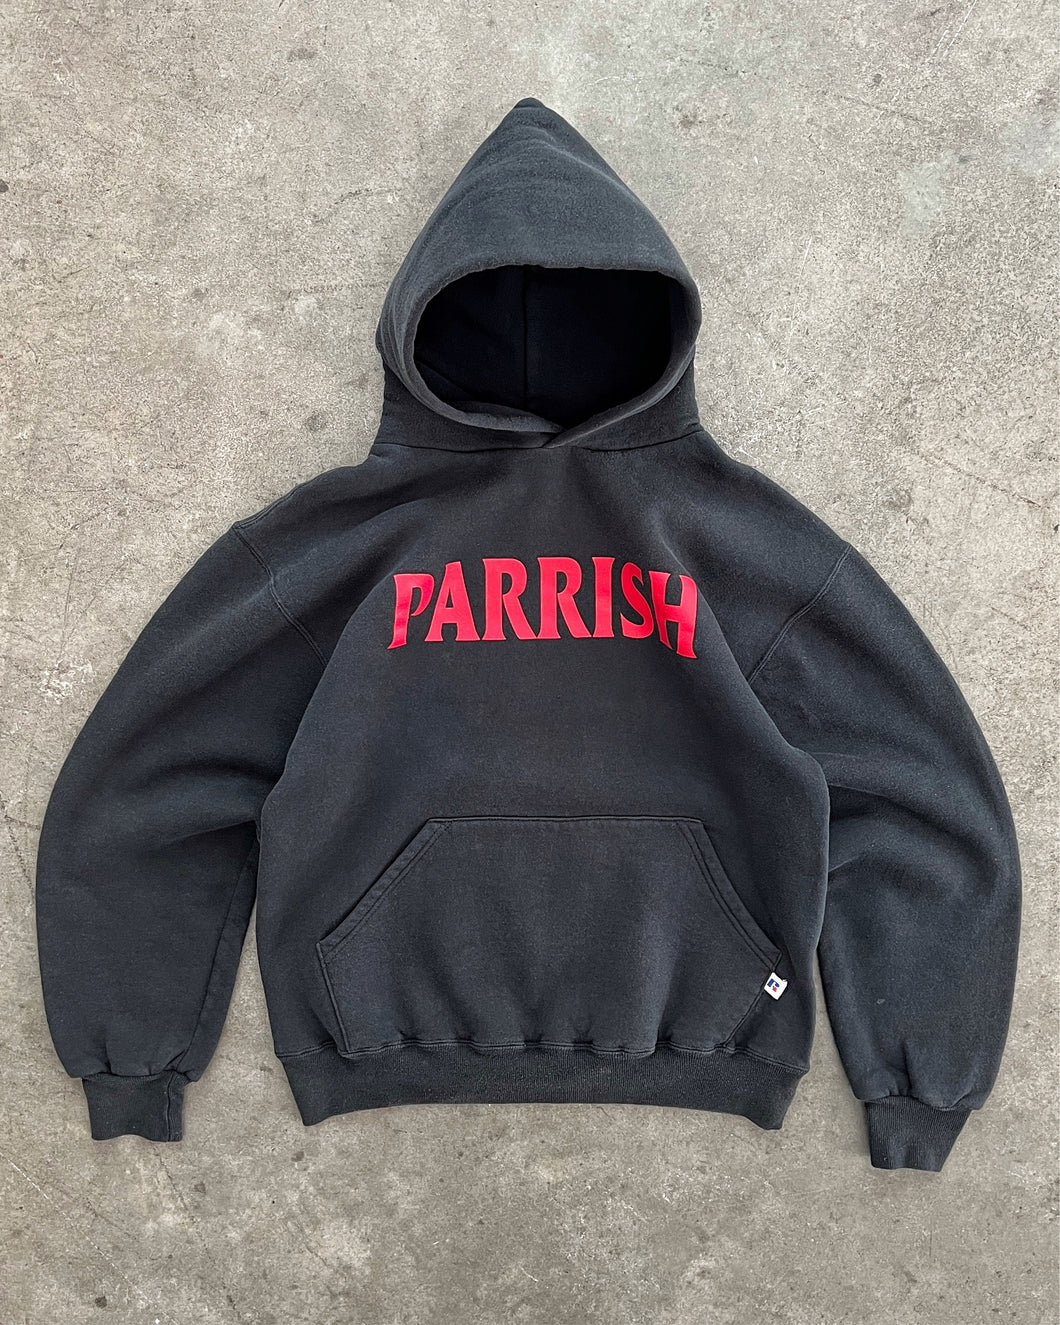 FADED BLACK “PARRISH” RUSSELL HOODIE - 1990S